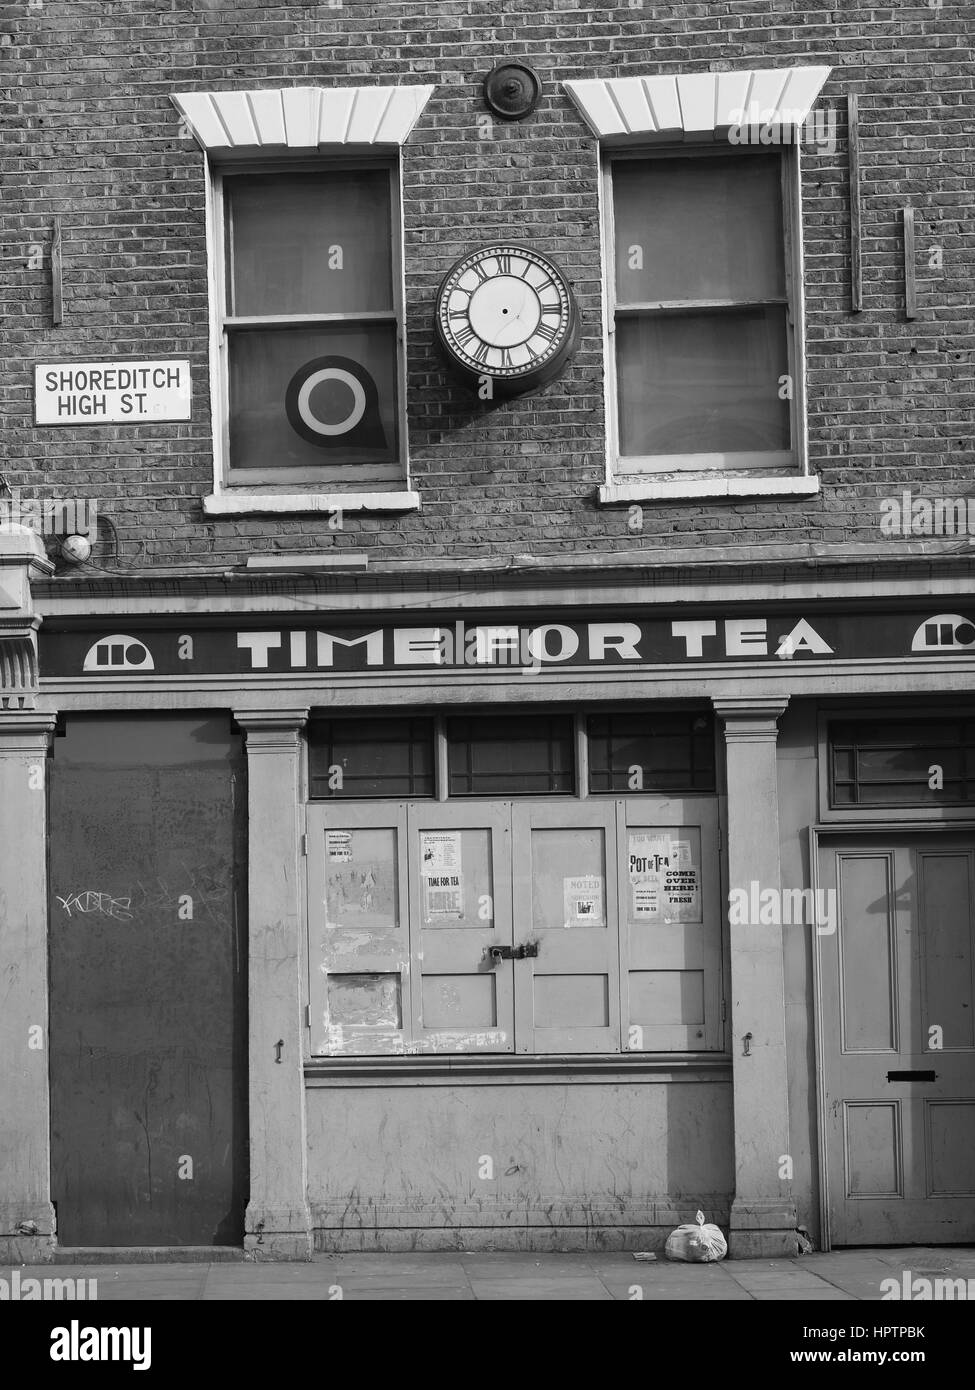 Time for tea in Shoreditch High Street Stock Photo